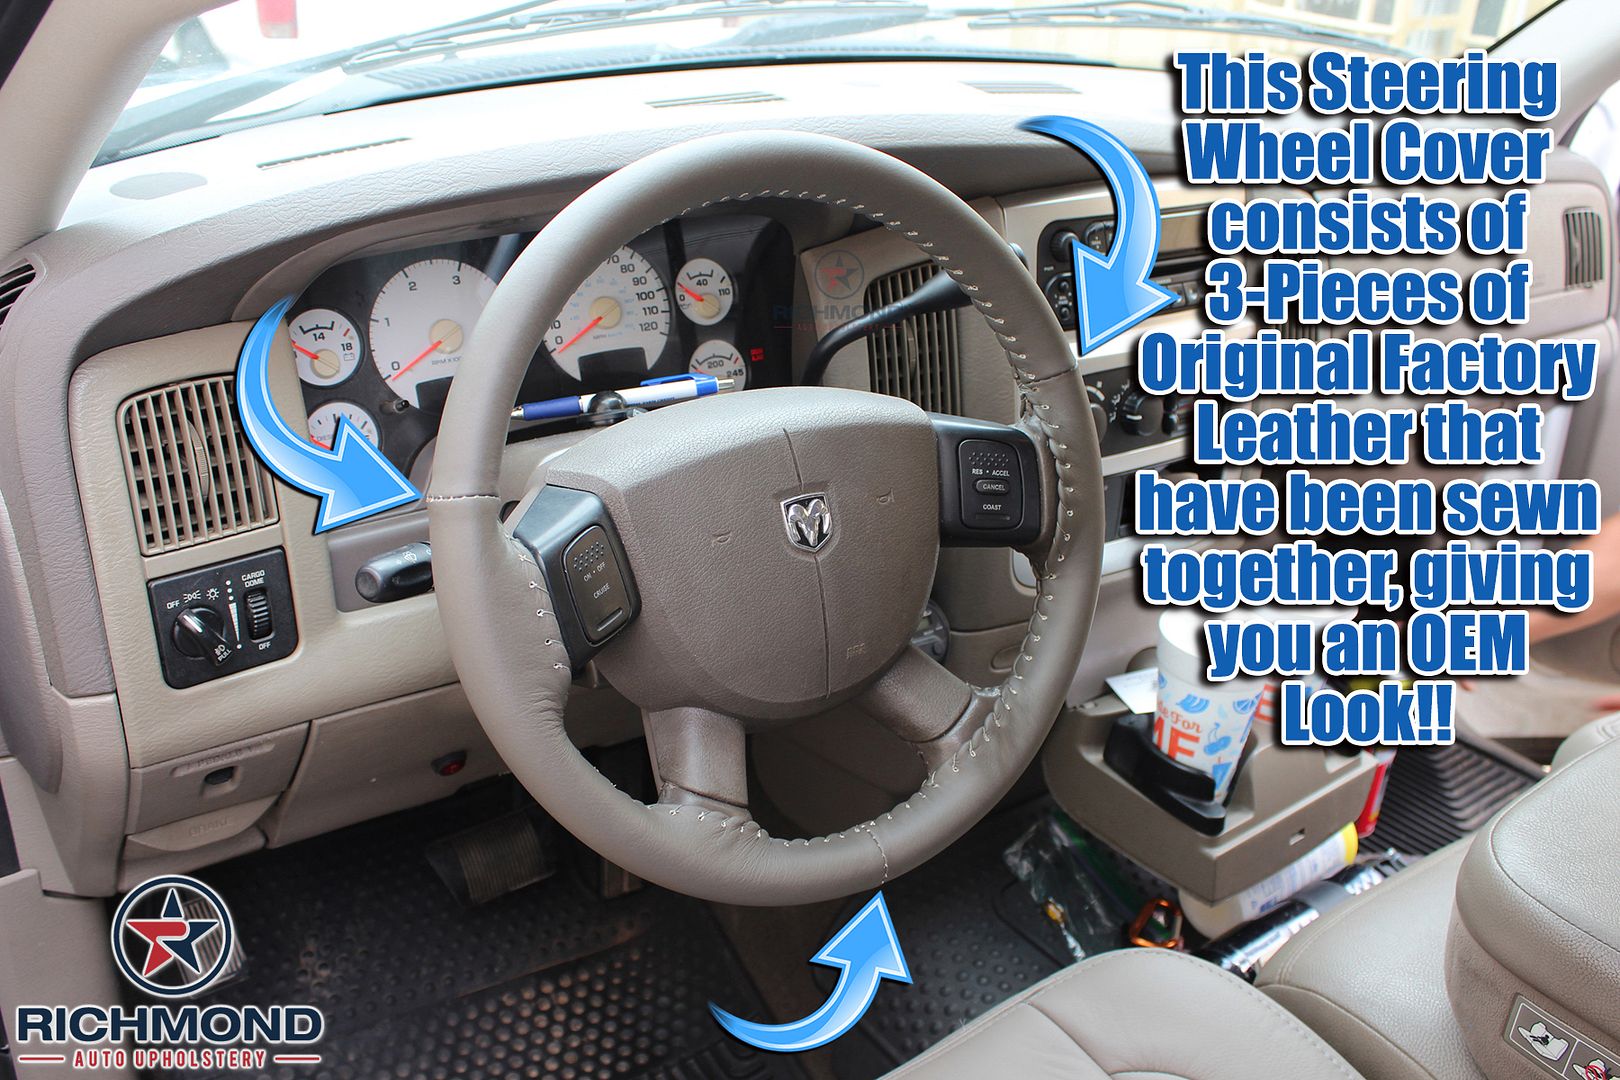 Details About For 06 09 Dodge Ram 3500 Dark Tan Leather Steering Wheel Cover W Needle Thread